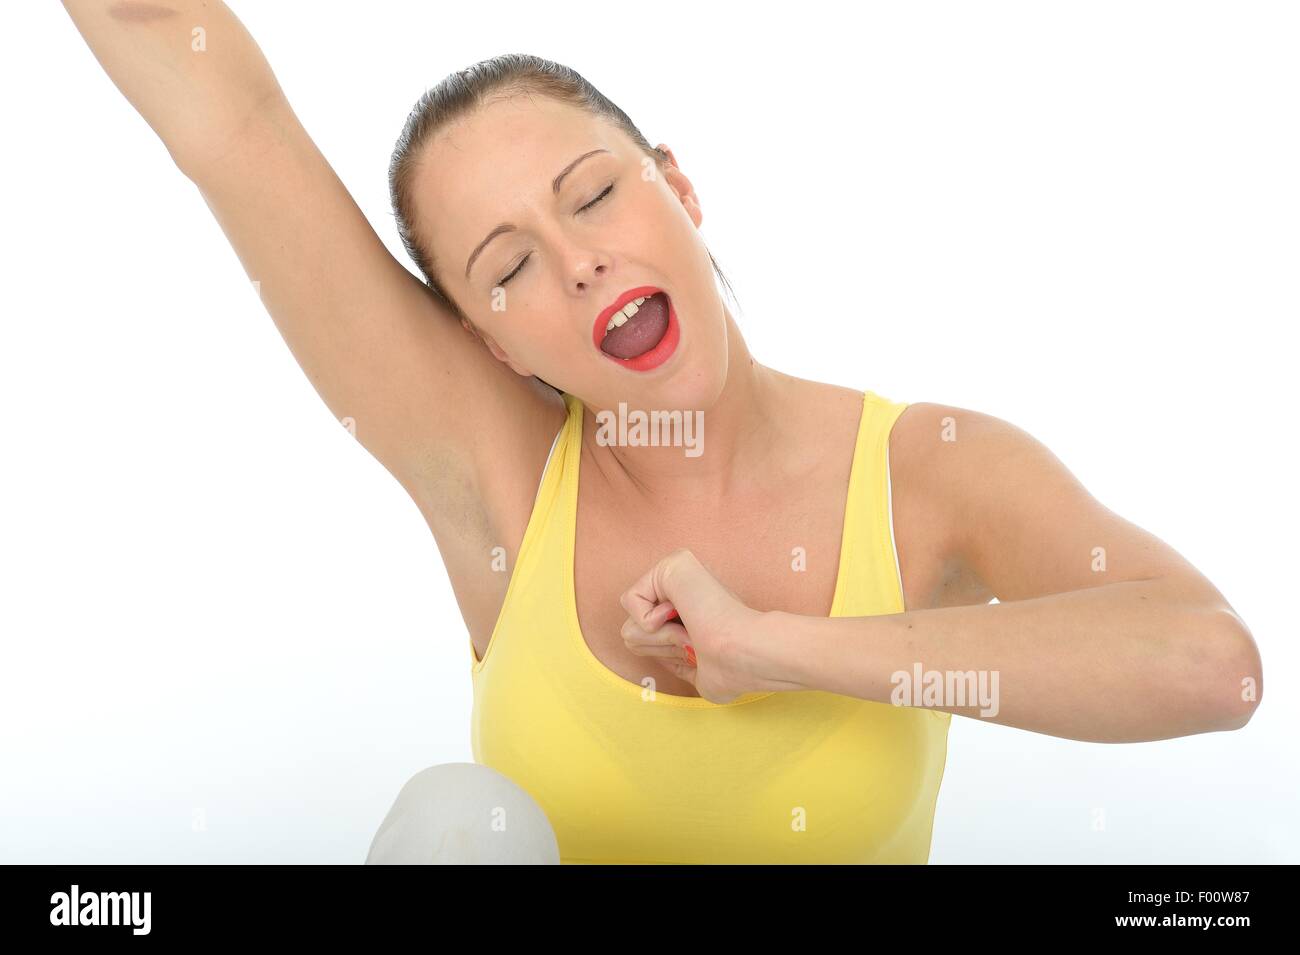 Attractive Tired Exhausted Young Woman Stretching And Yawning Wearing A Bright Yellow Vest Top Isolated Against A White Background With Copy Space Stock Photo